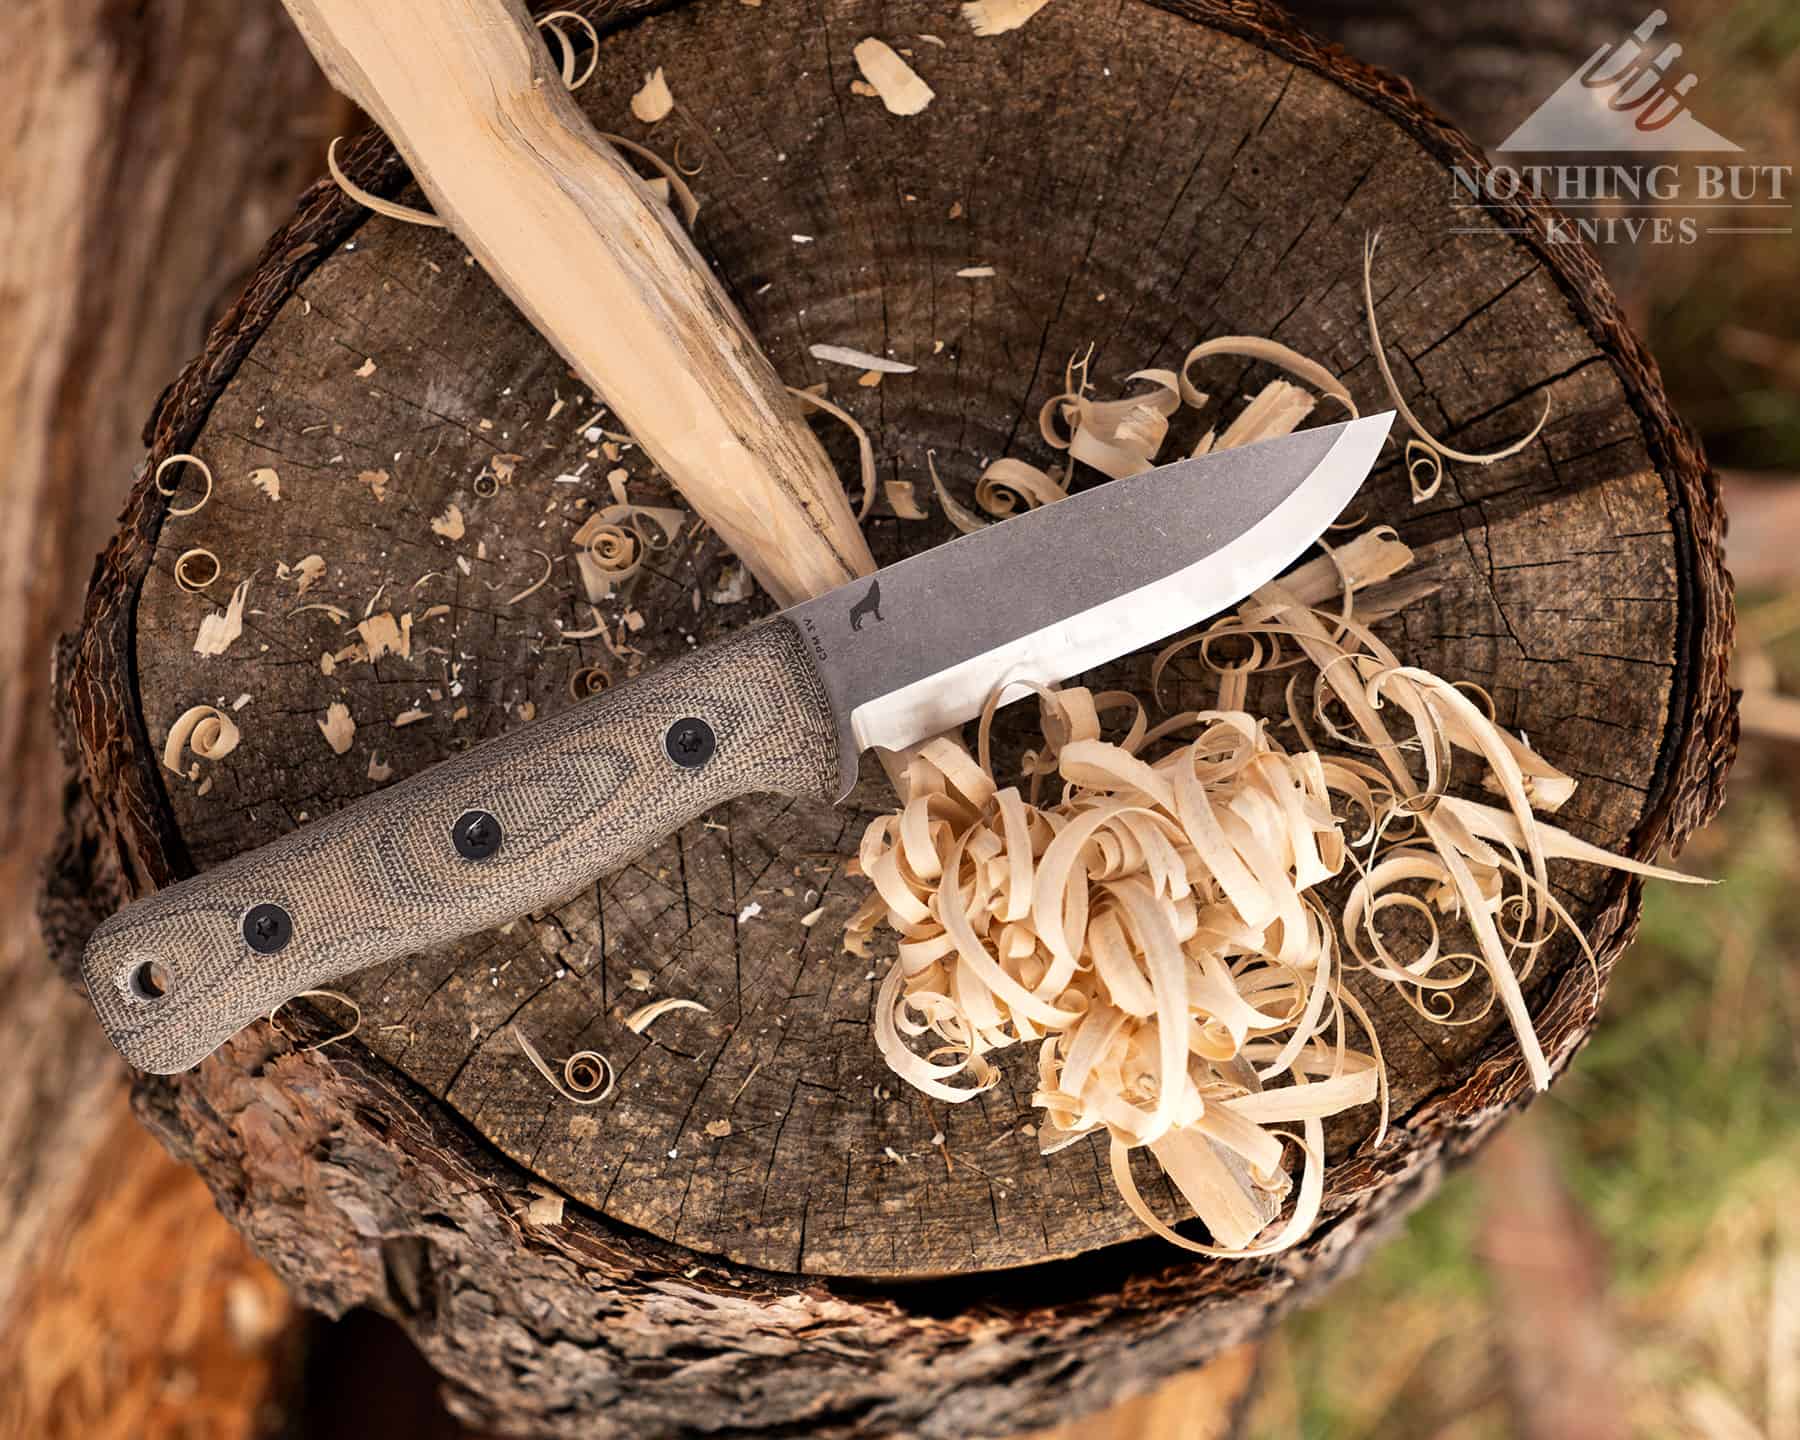 The Reiff F4 Scandi grind bushcraft knife is a great choice for making feather sticks and starting campfires with a ferro rod. 